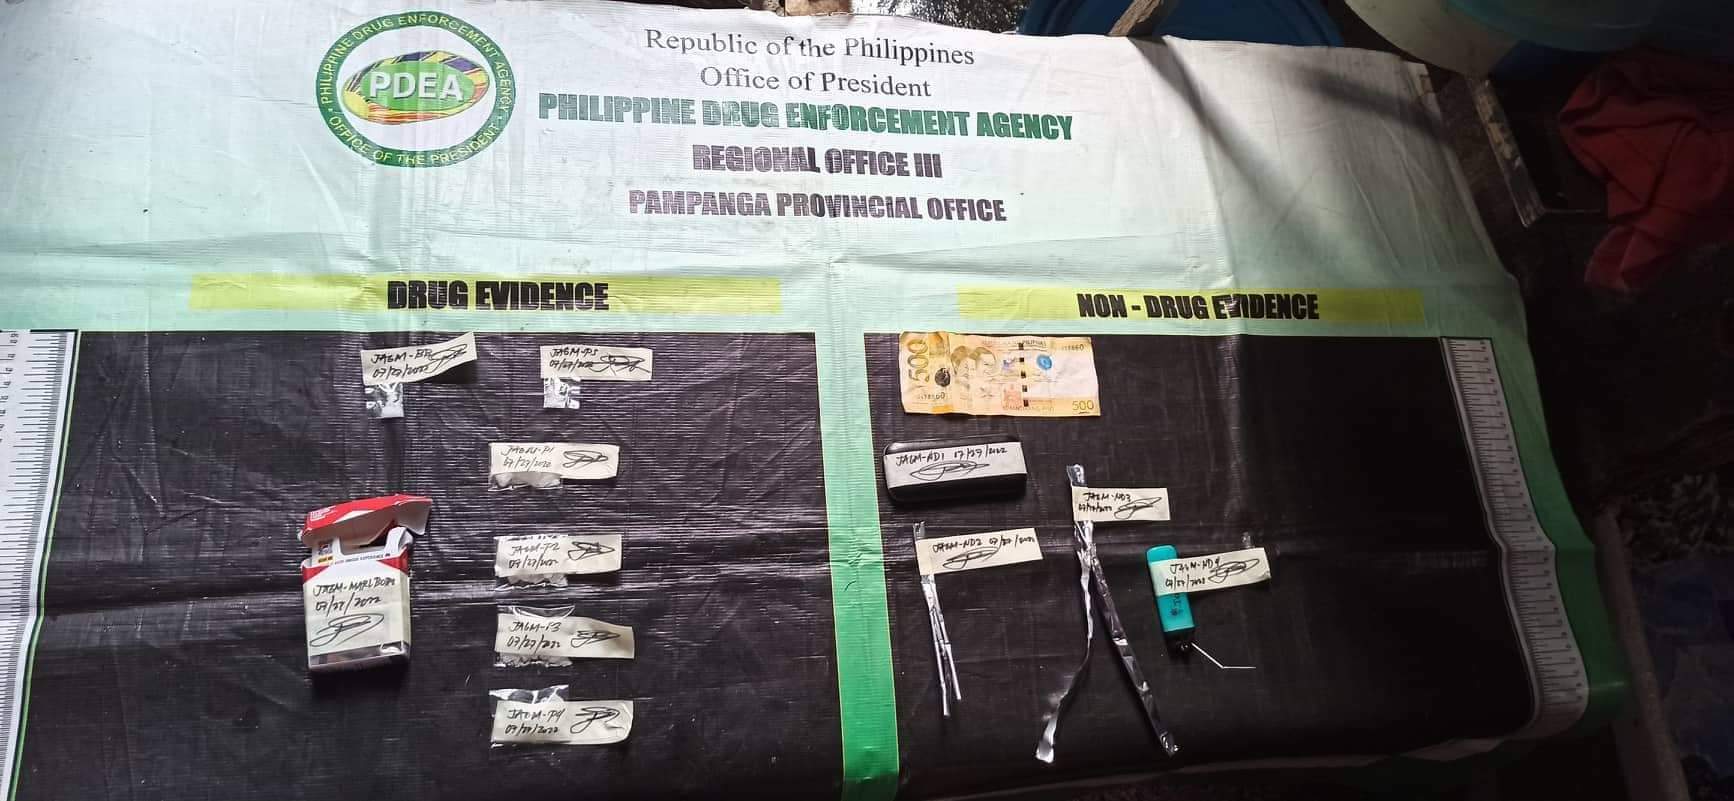 The pieces of evidence were allegedly seized from the five drug suspects during a buy-bust operation in Mabalacat City